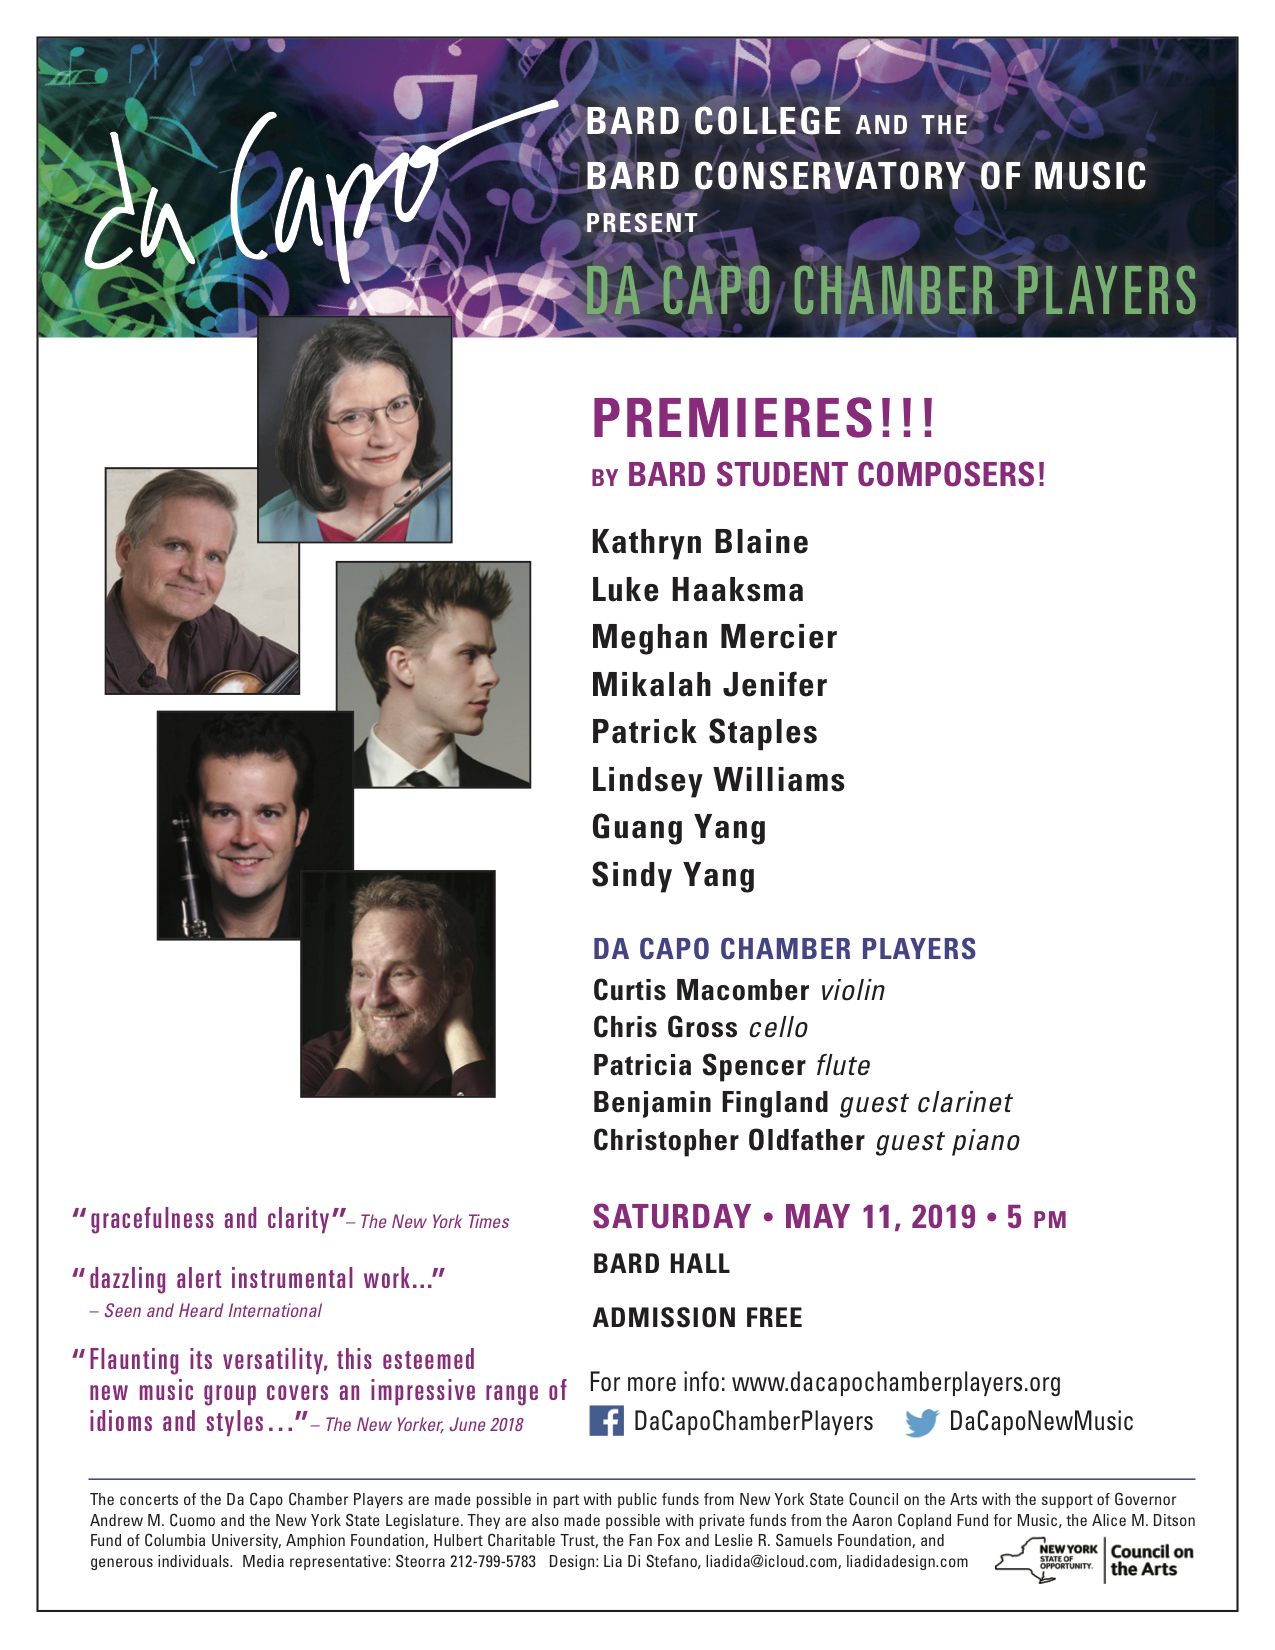 Da Capo Chamber Players Perform Premieres of Bard Student Composers